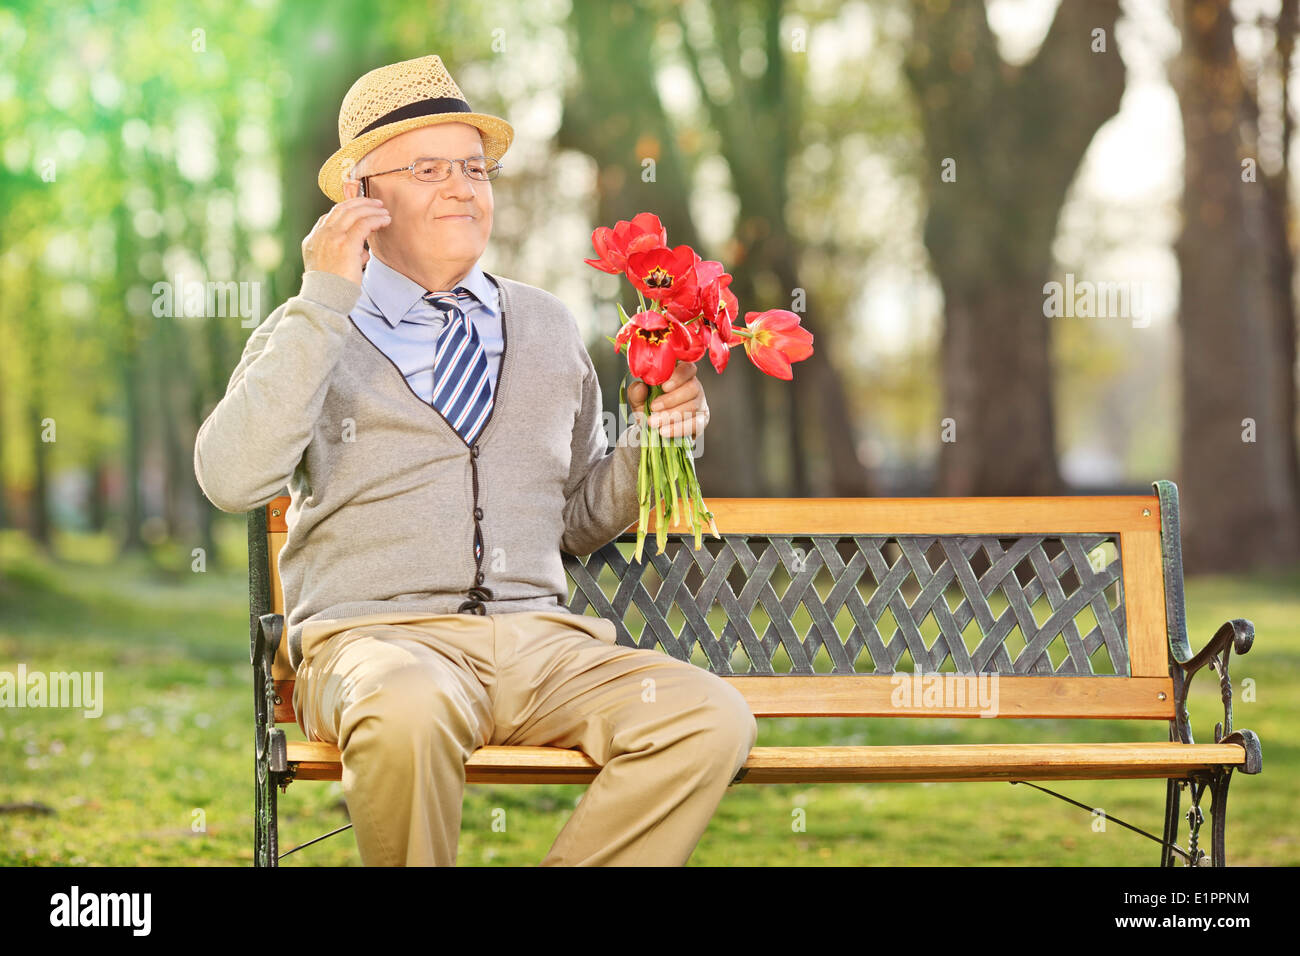 Senior talking on phone and holding red tulips seated on a bench in park Stock Photo